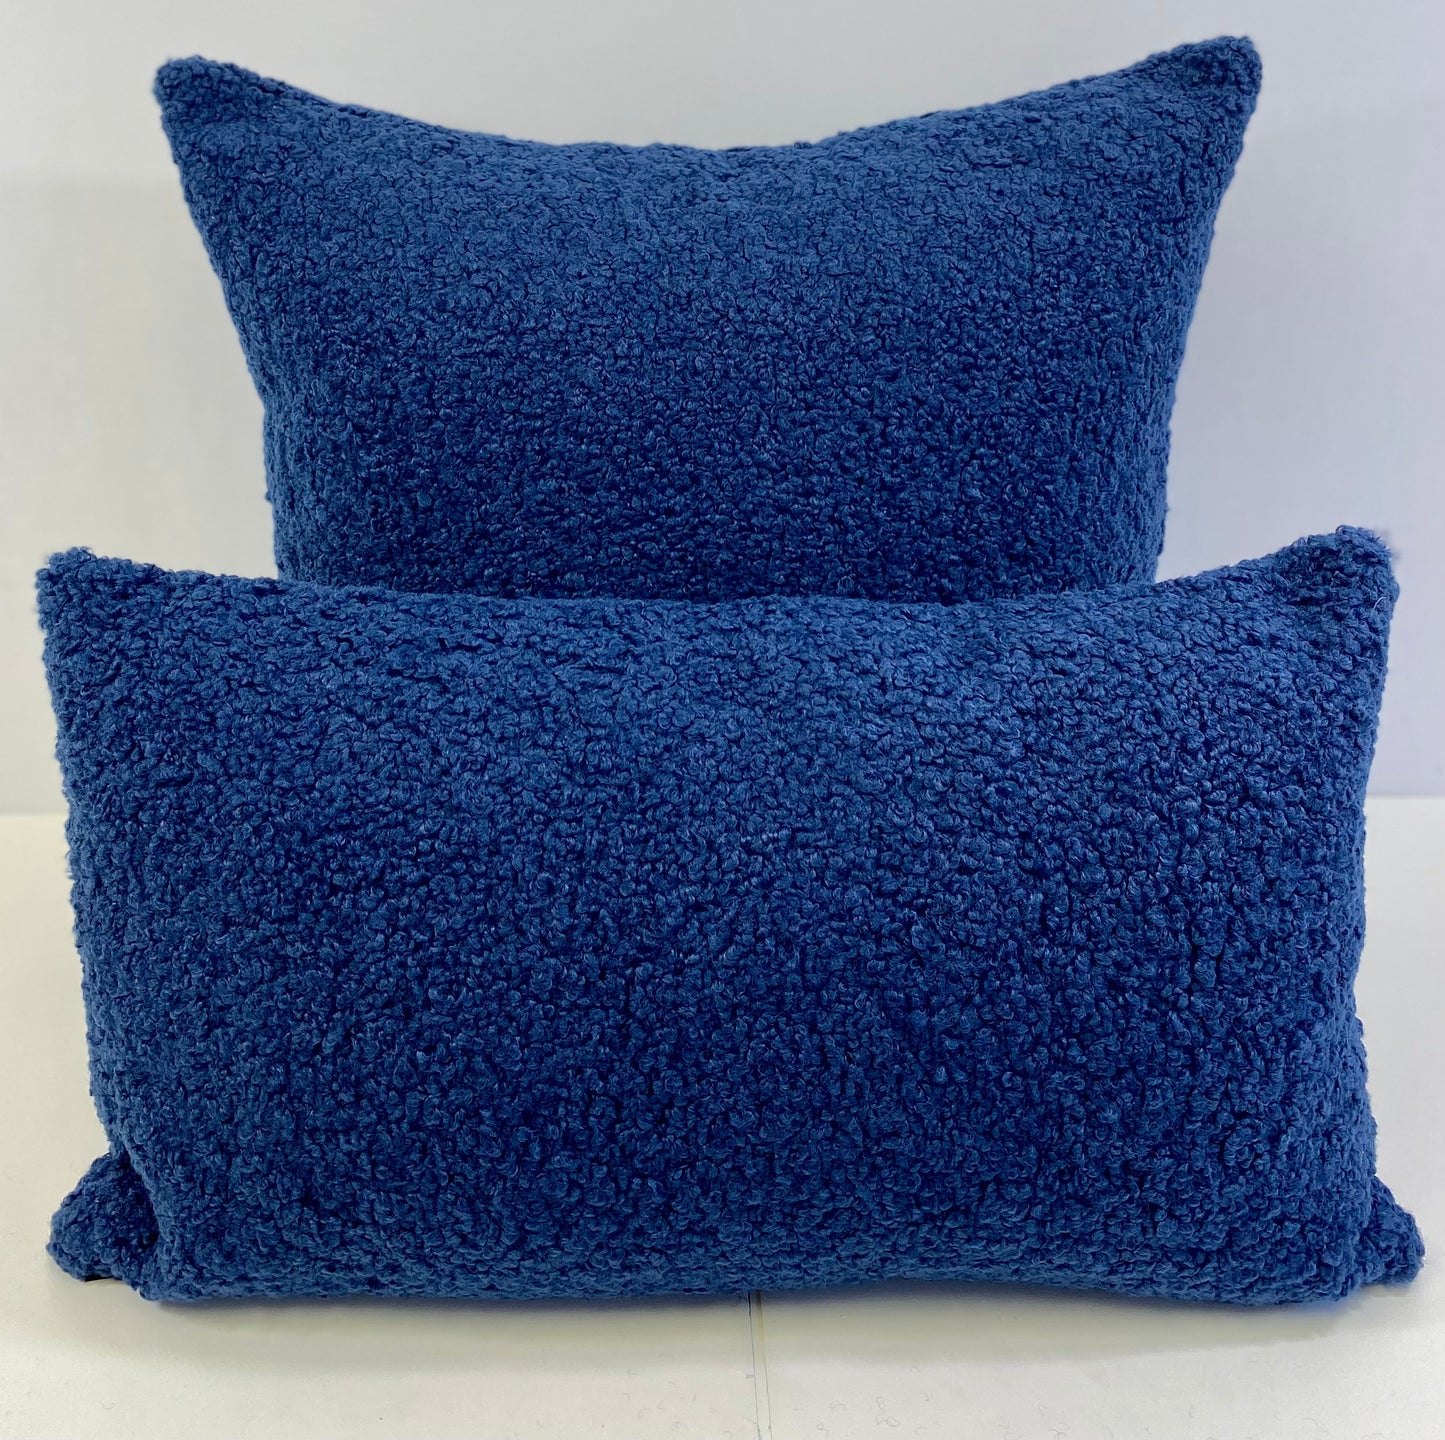 Luxury Lumbar Pillow - 24" x 14" -  Poodle Navy; Poodle like fiber, very soft to the touch